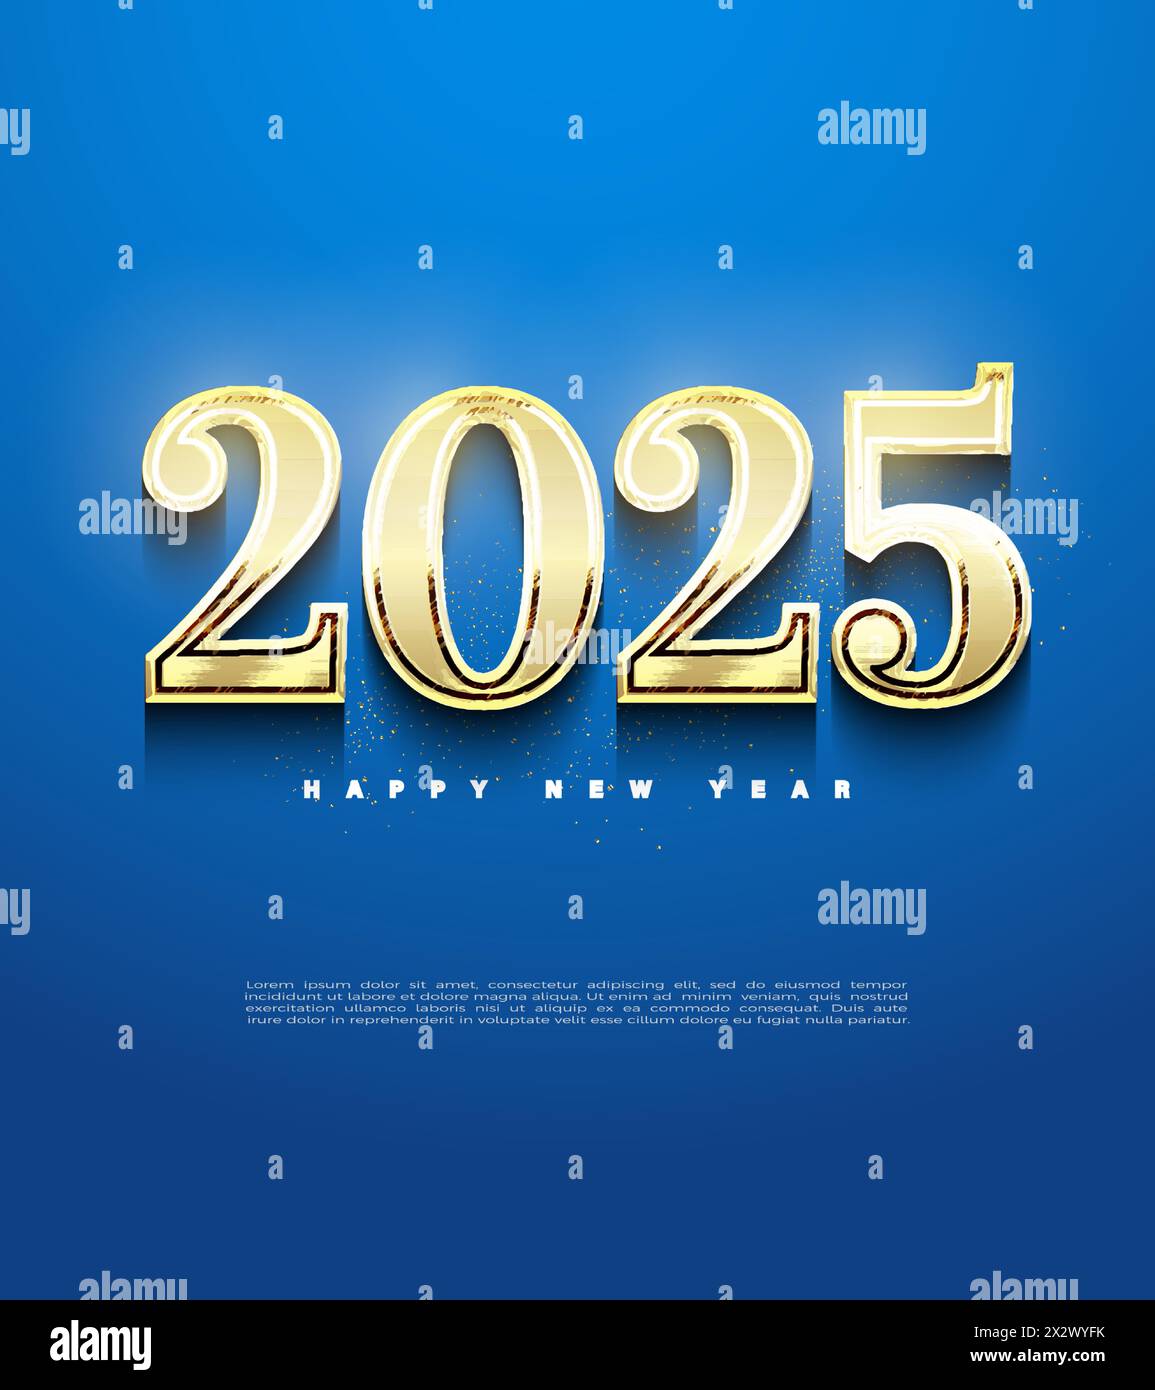 happy new year 2025 on a clean background with textured glossy colored numbers. Stock Vector